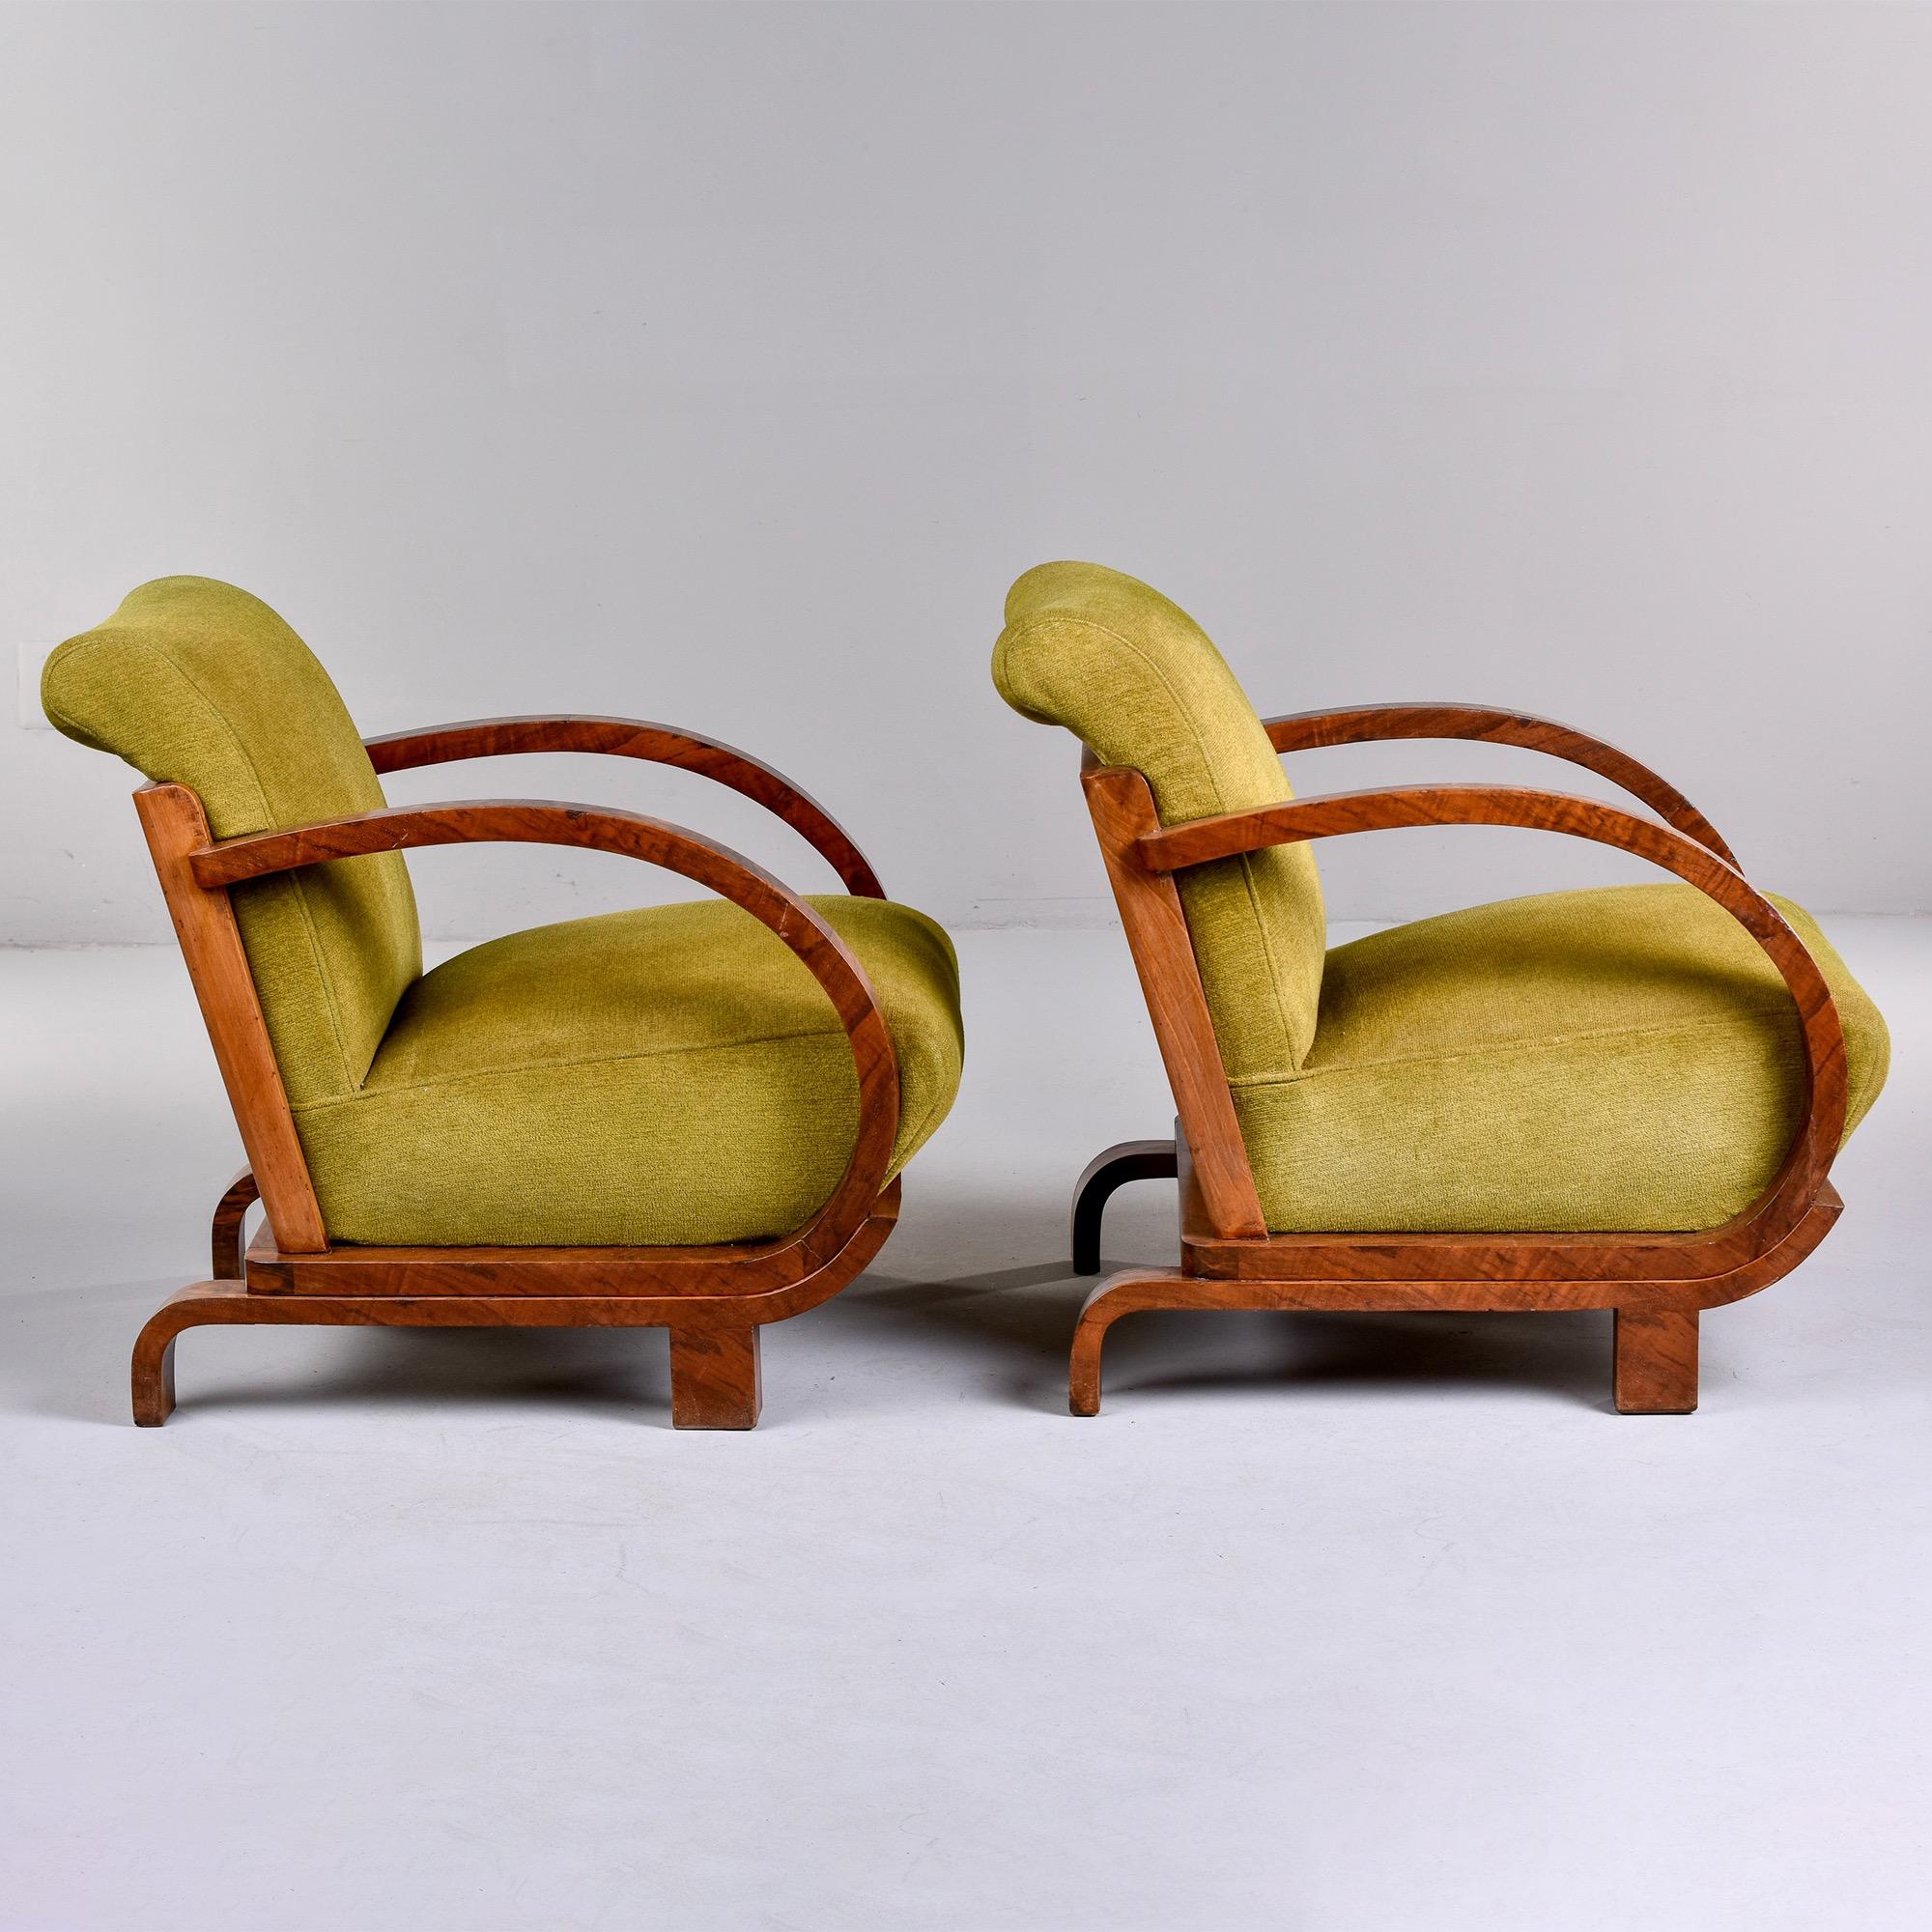 Pair French Art Deco Walnut Bentwood Armchairs with Original Upholstery 3